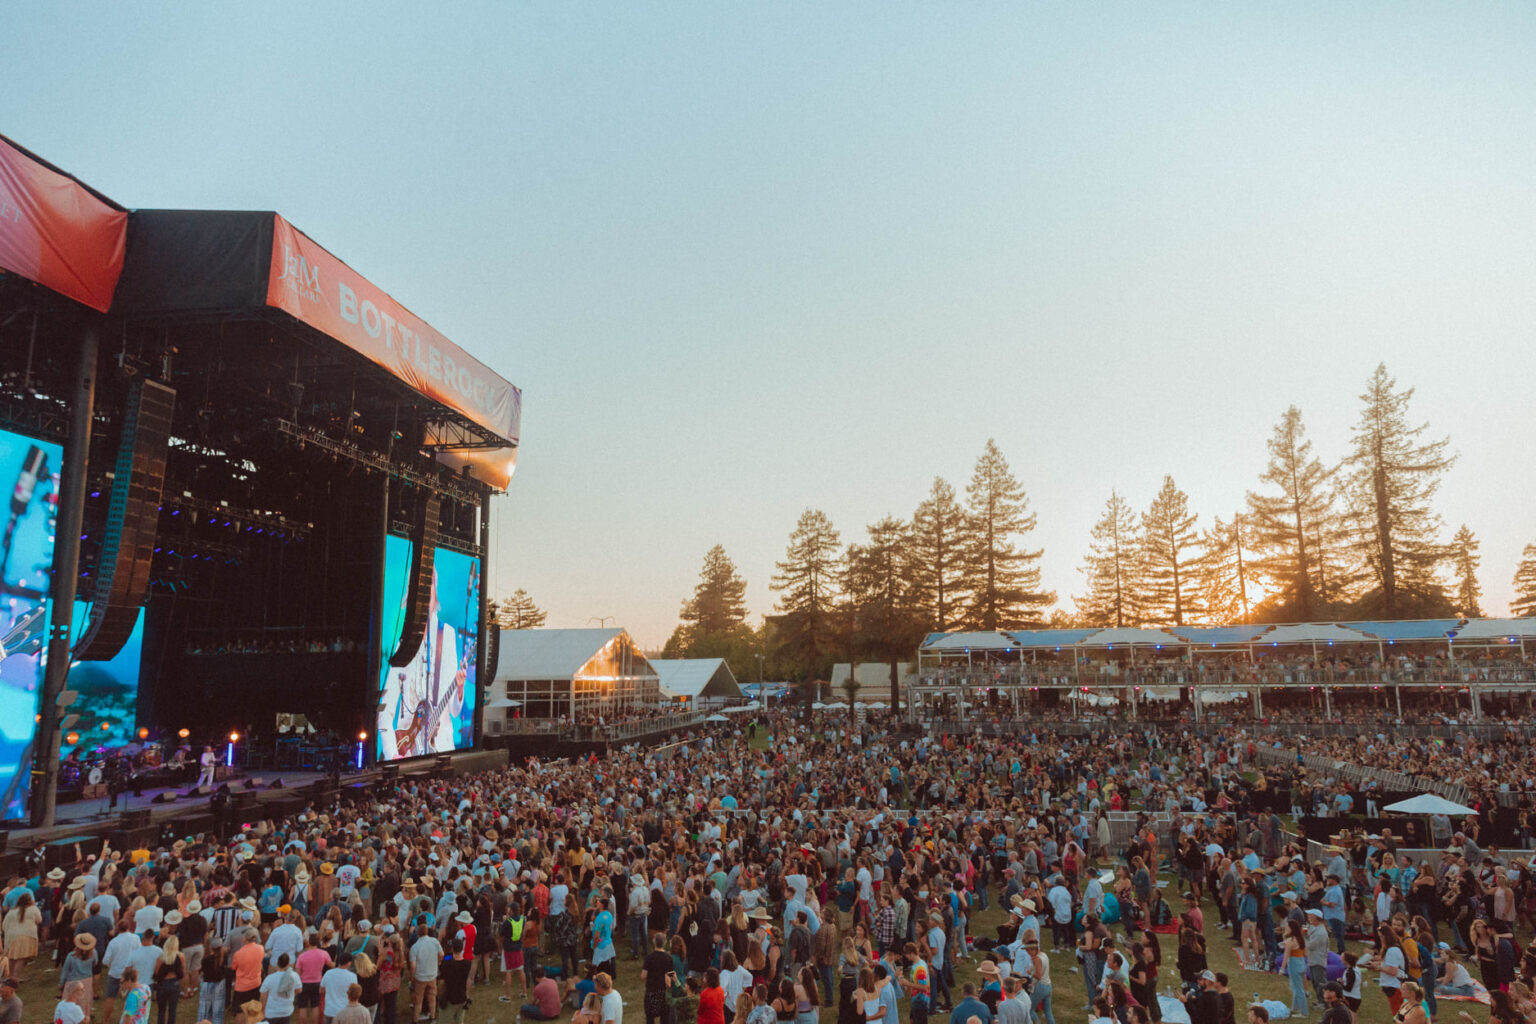 BottleRock 2022 Lineup Announced Red Hot Chili Peppers, The Smashing